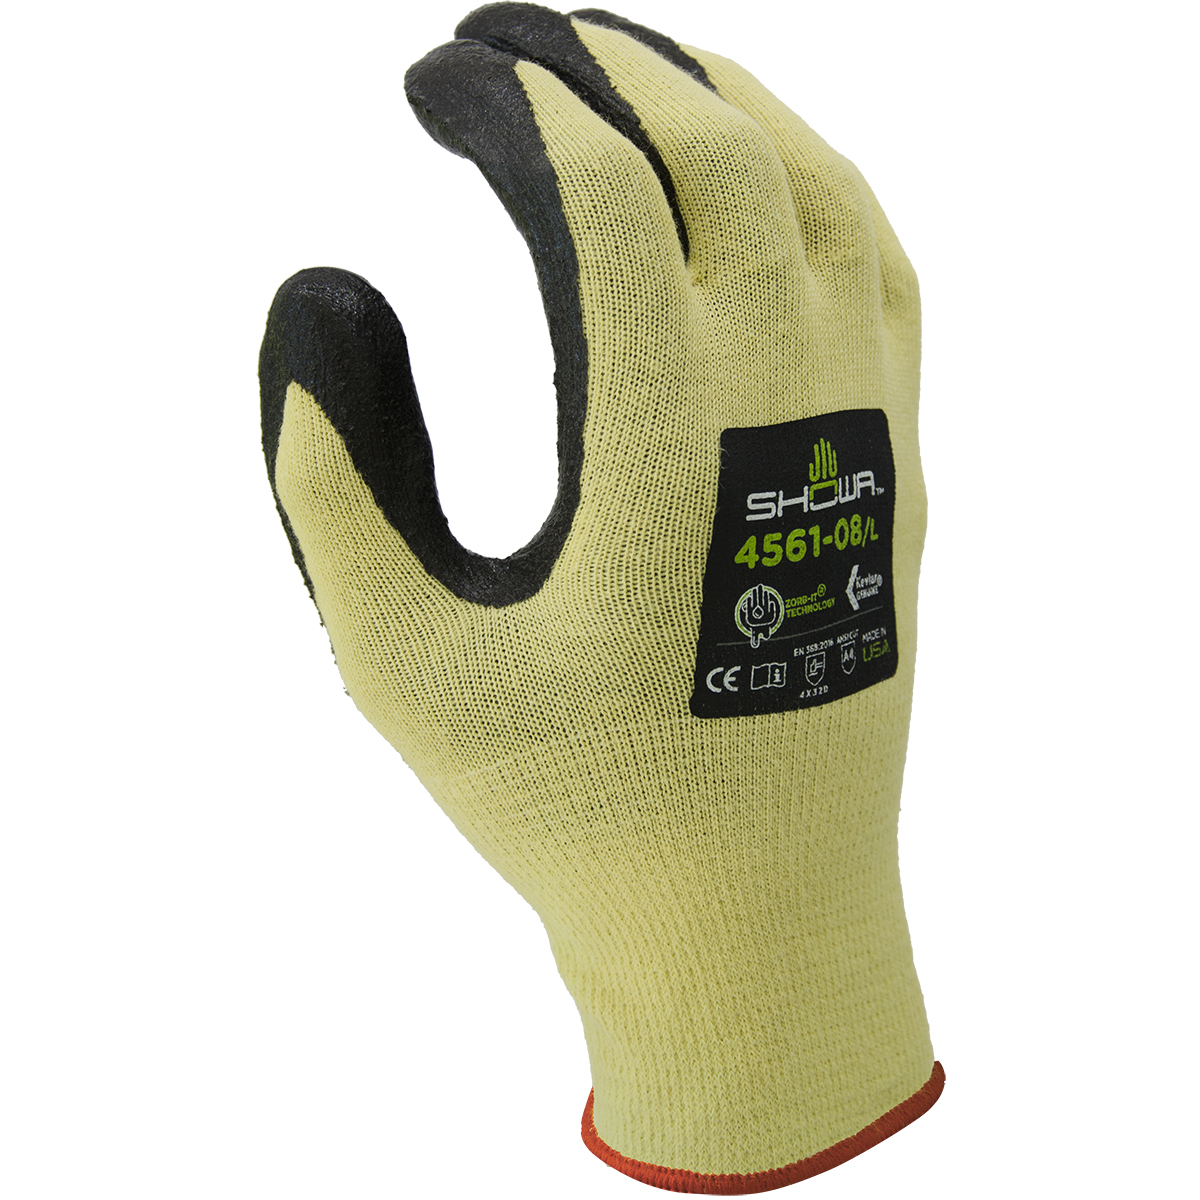 Cut resistant, sponge nitrile palm w/Zorb-IT technology, 15 gauge seamless knit made Kevlar®, yellow w/black dip,  ANSI CUT LEVEL A4/extra extra large - Cut Resistant